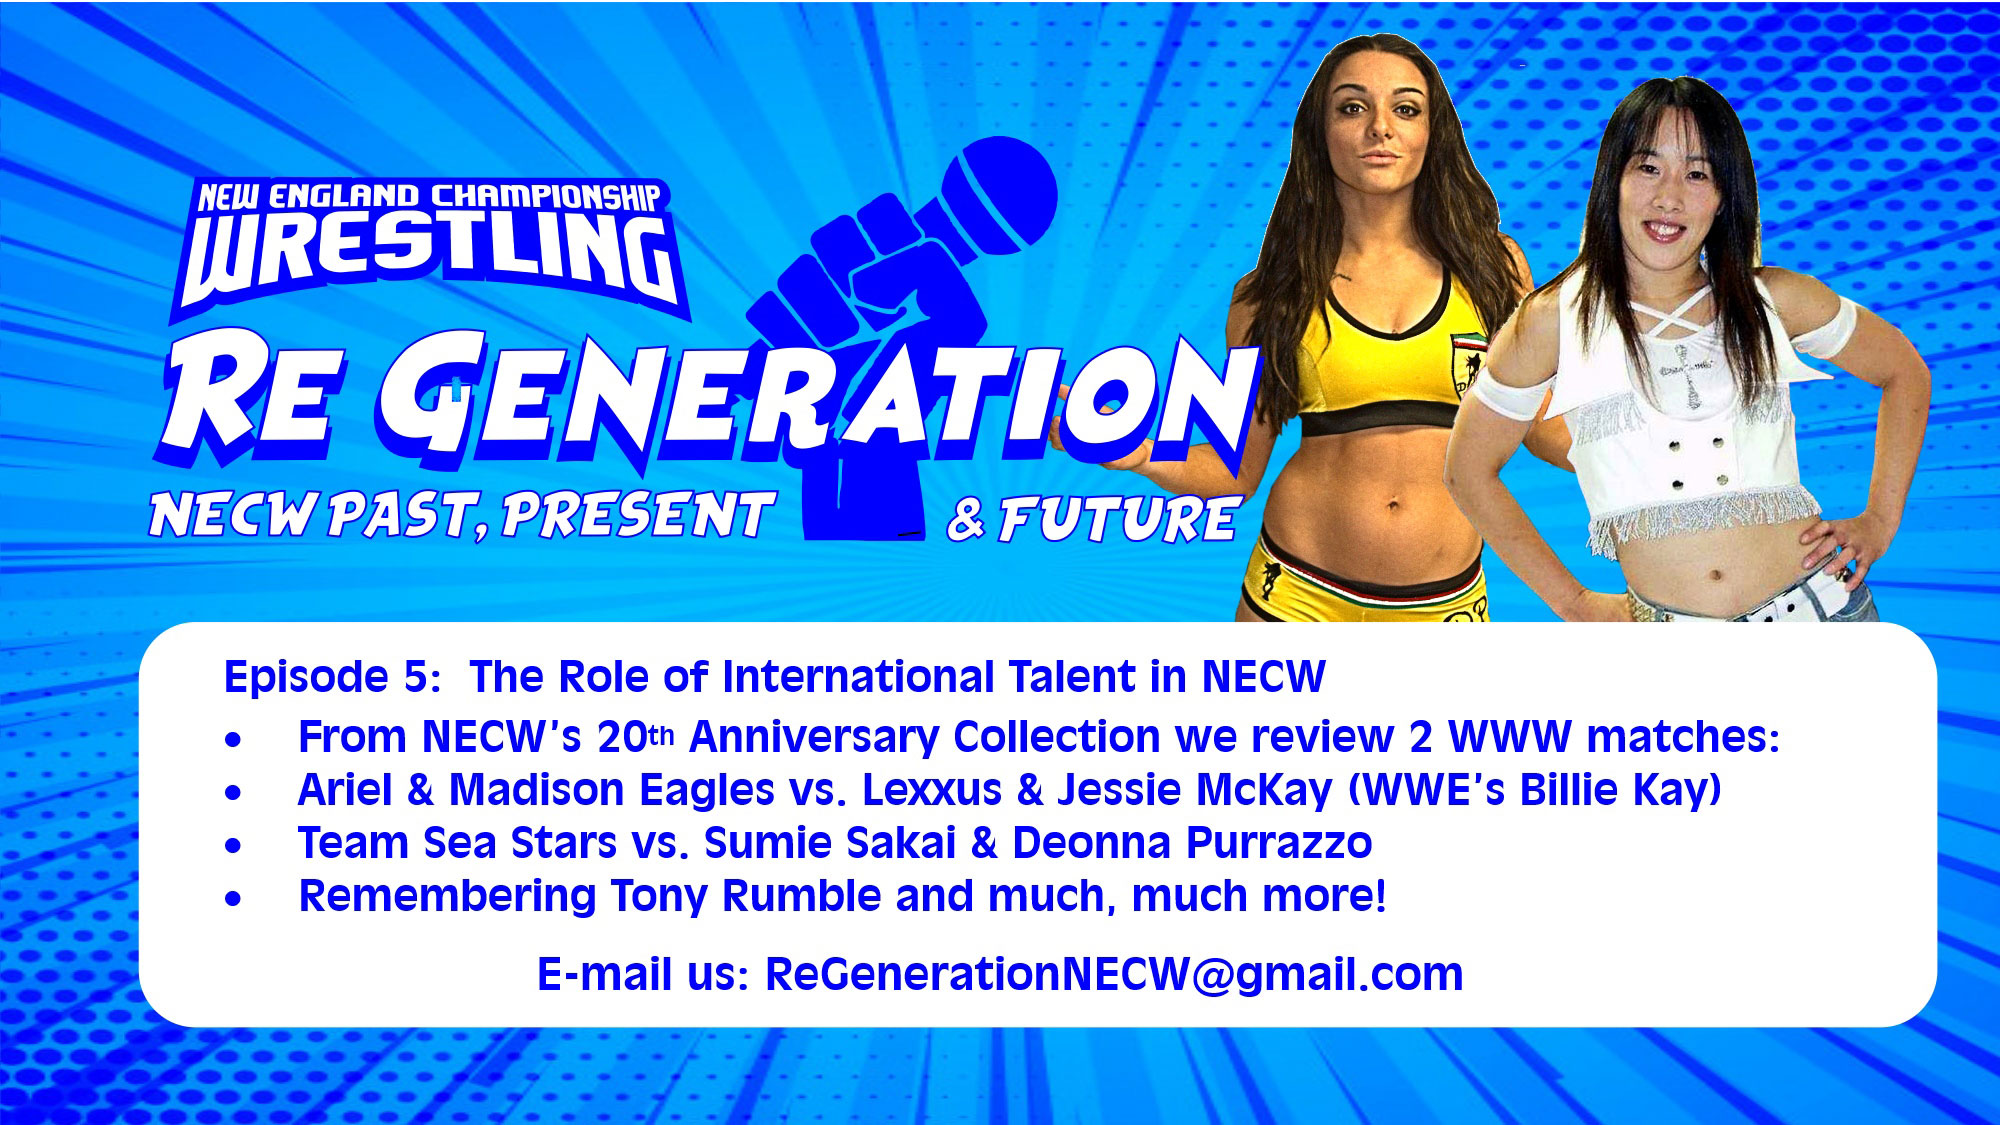 NECW's ReGeneration Podcast: Ep 5 - The Role of International Talent in NECW